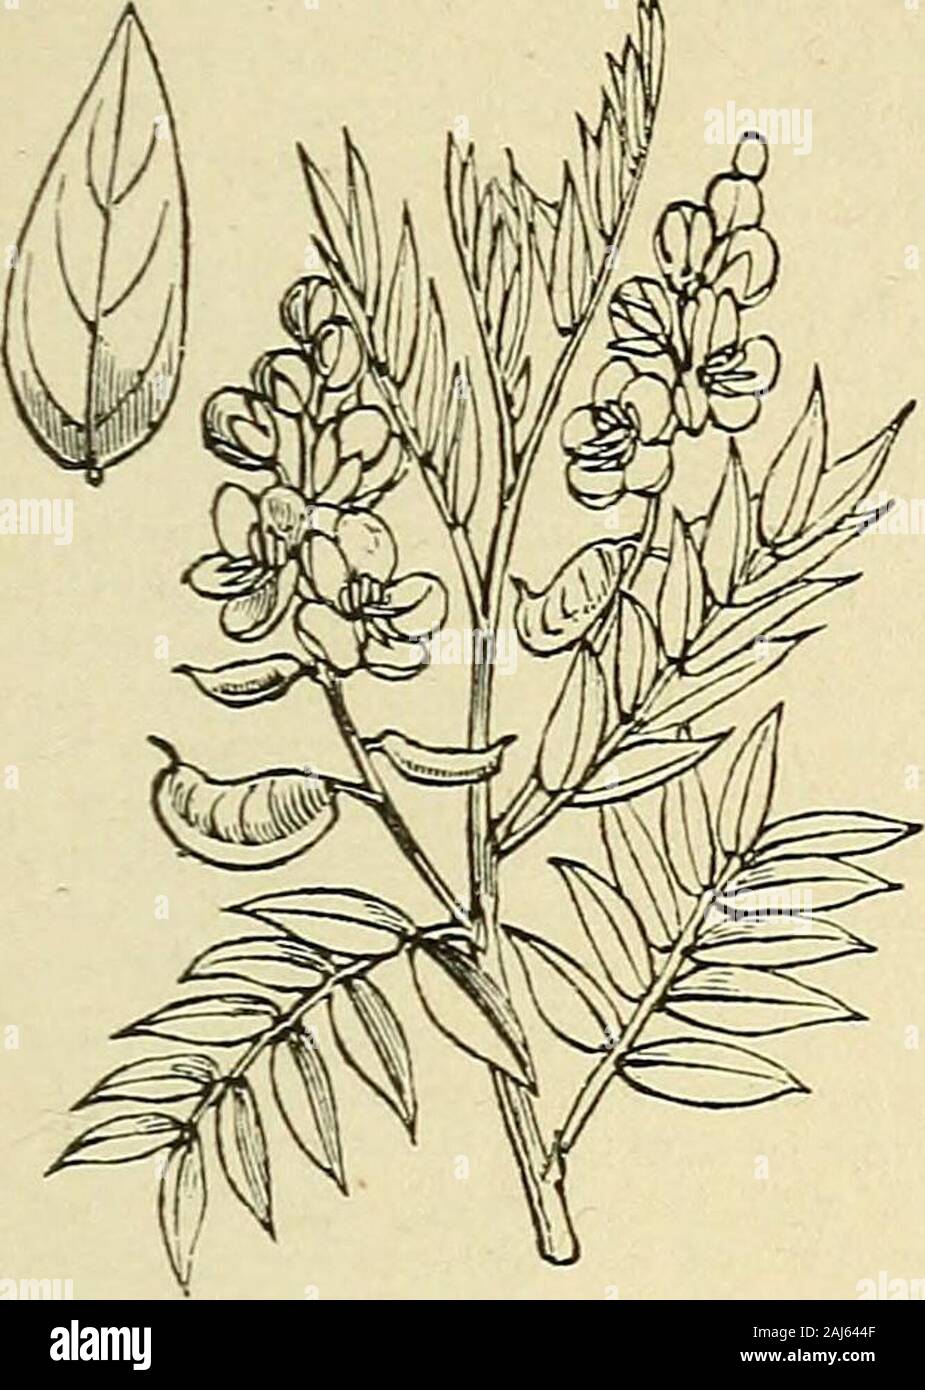 The treasury of botany: a popular dictionary of the vegetable kingdom; with which is incorporated a glossary of botanical terms . cers and various skin diseases, as well as internally in diabetes and other disorders; they are likewise used for similar purposes in the Mauritius and the West Indies. I The seeds of C. Absus, a native of Egypt I and of India, are bitter, aromatic, and I slightly mucilaginous. They are used in Egypt as a remedy for ophthalmia, as i are the seeds of C. auriculata in India, where also the bark of this shrub is employed by the natives in tanning leather. C. occidental Stock Photo